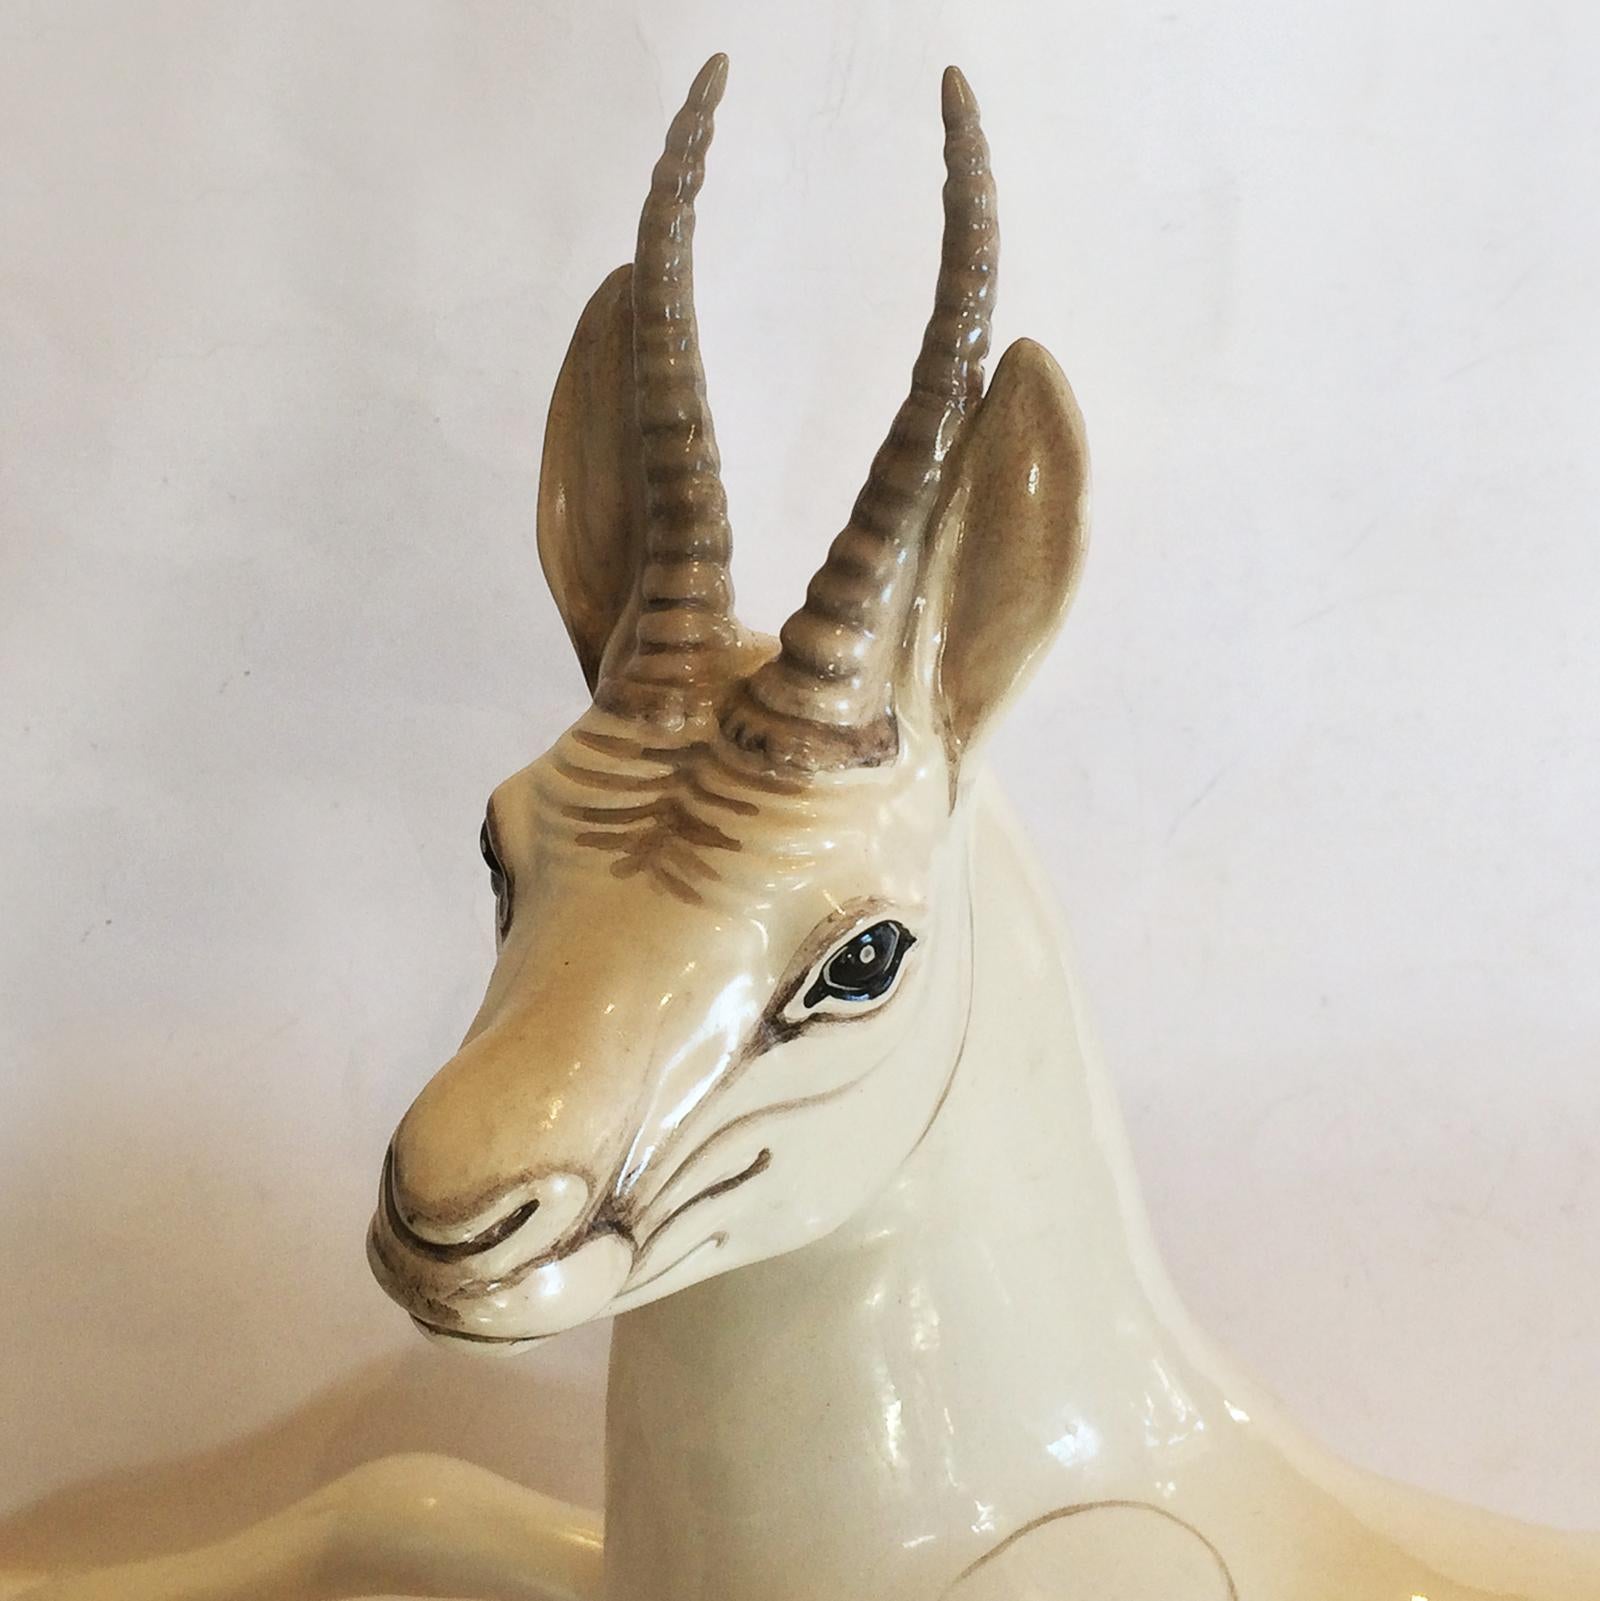 Art Deco large Gazelle by Ronzan ex. Lenci Designer, Italy. A wonderful Statuette, capturing the detail and beauty of this lovely creature representing a proud part of Art Deco. All in perfect original condition with no damage or losses, with the